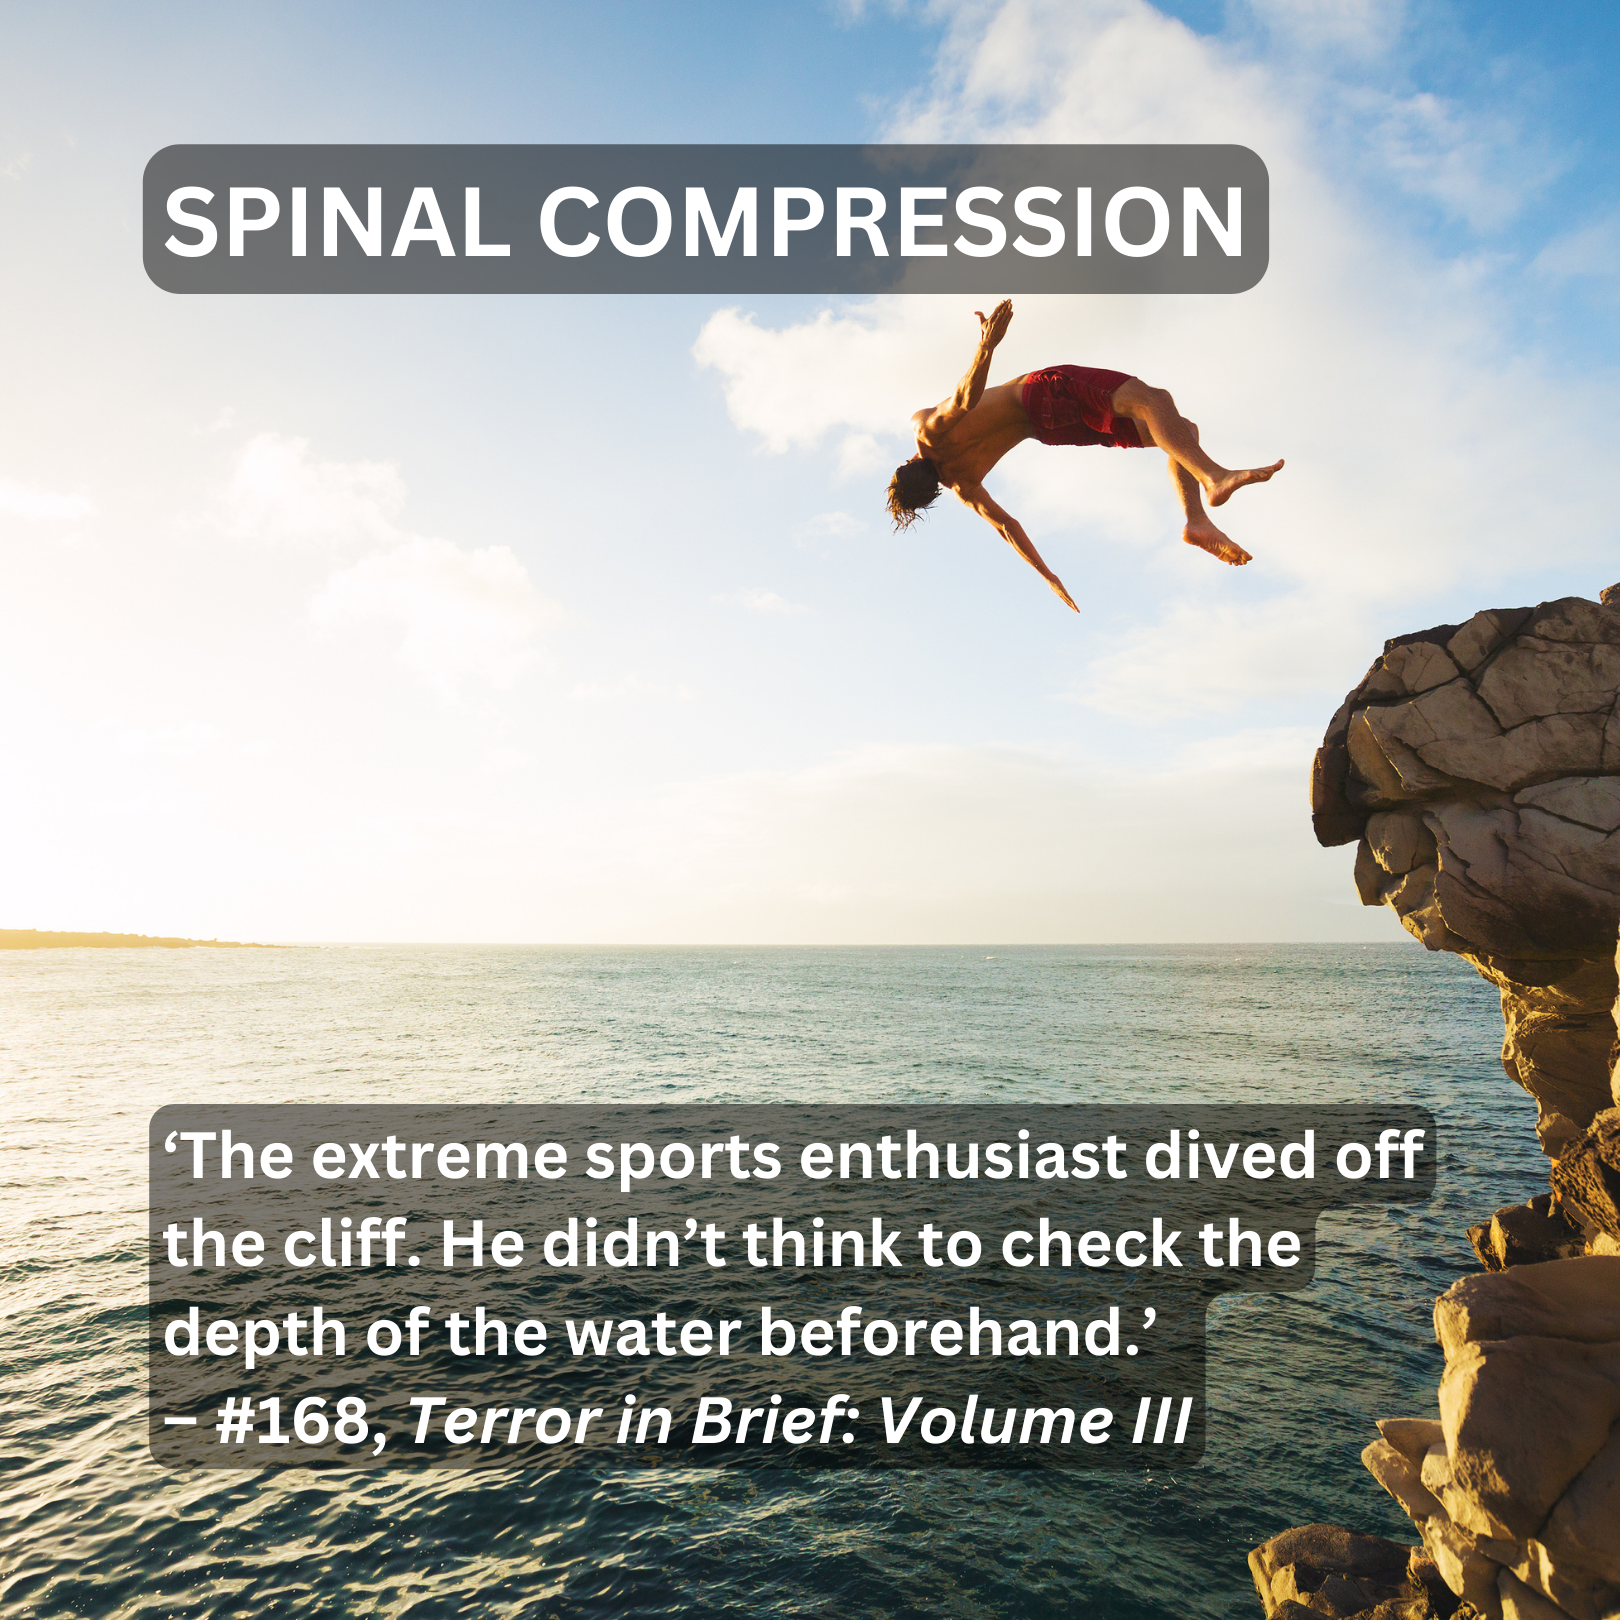 Spinal Compression from Terror in Brief: Volume III